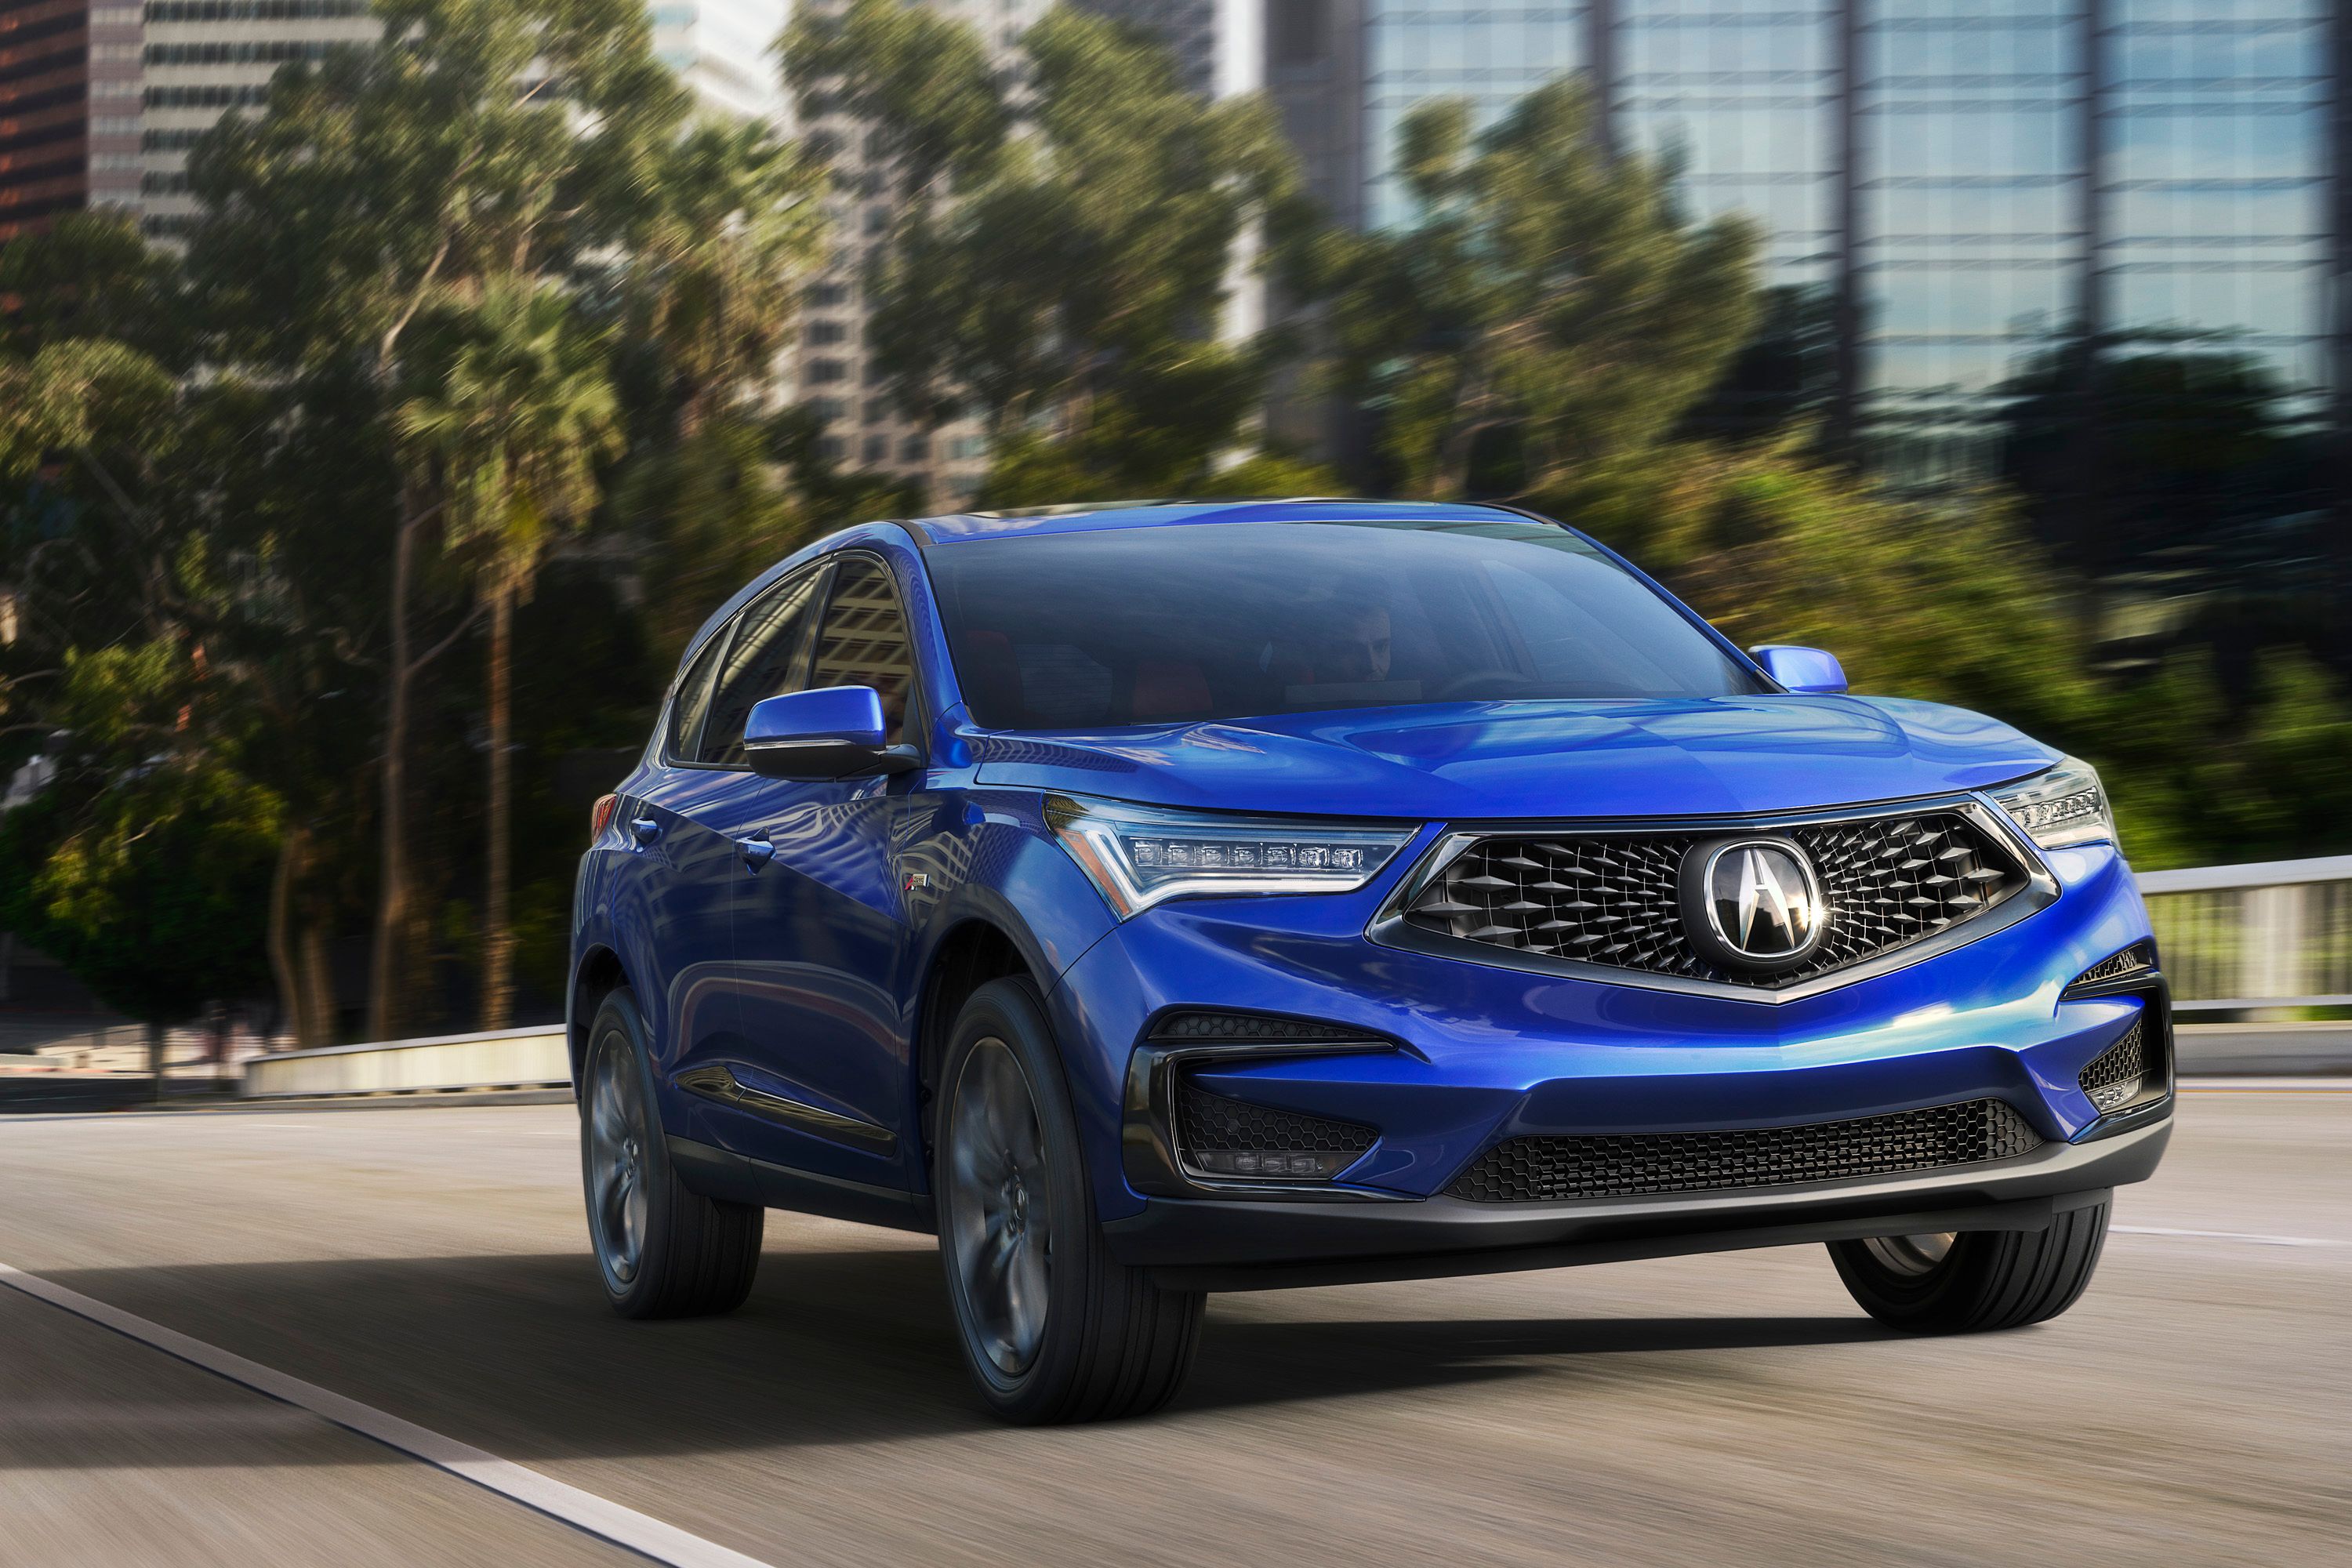 2016 - 2018 Acura is Not Interested in a Subcompact SUV; Aims to Always Put Performance over Luxury